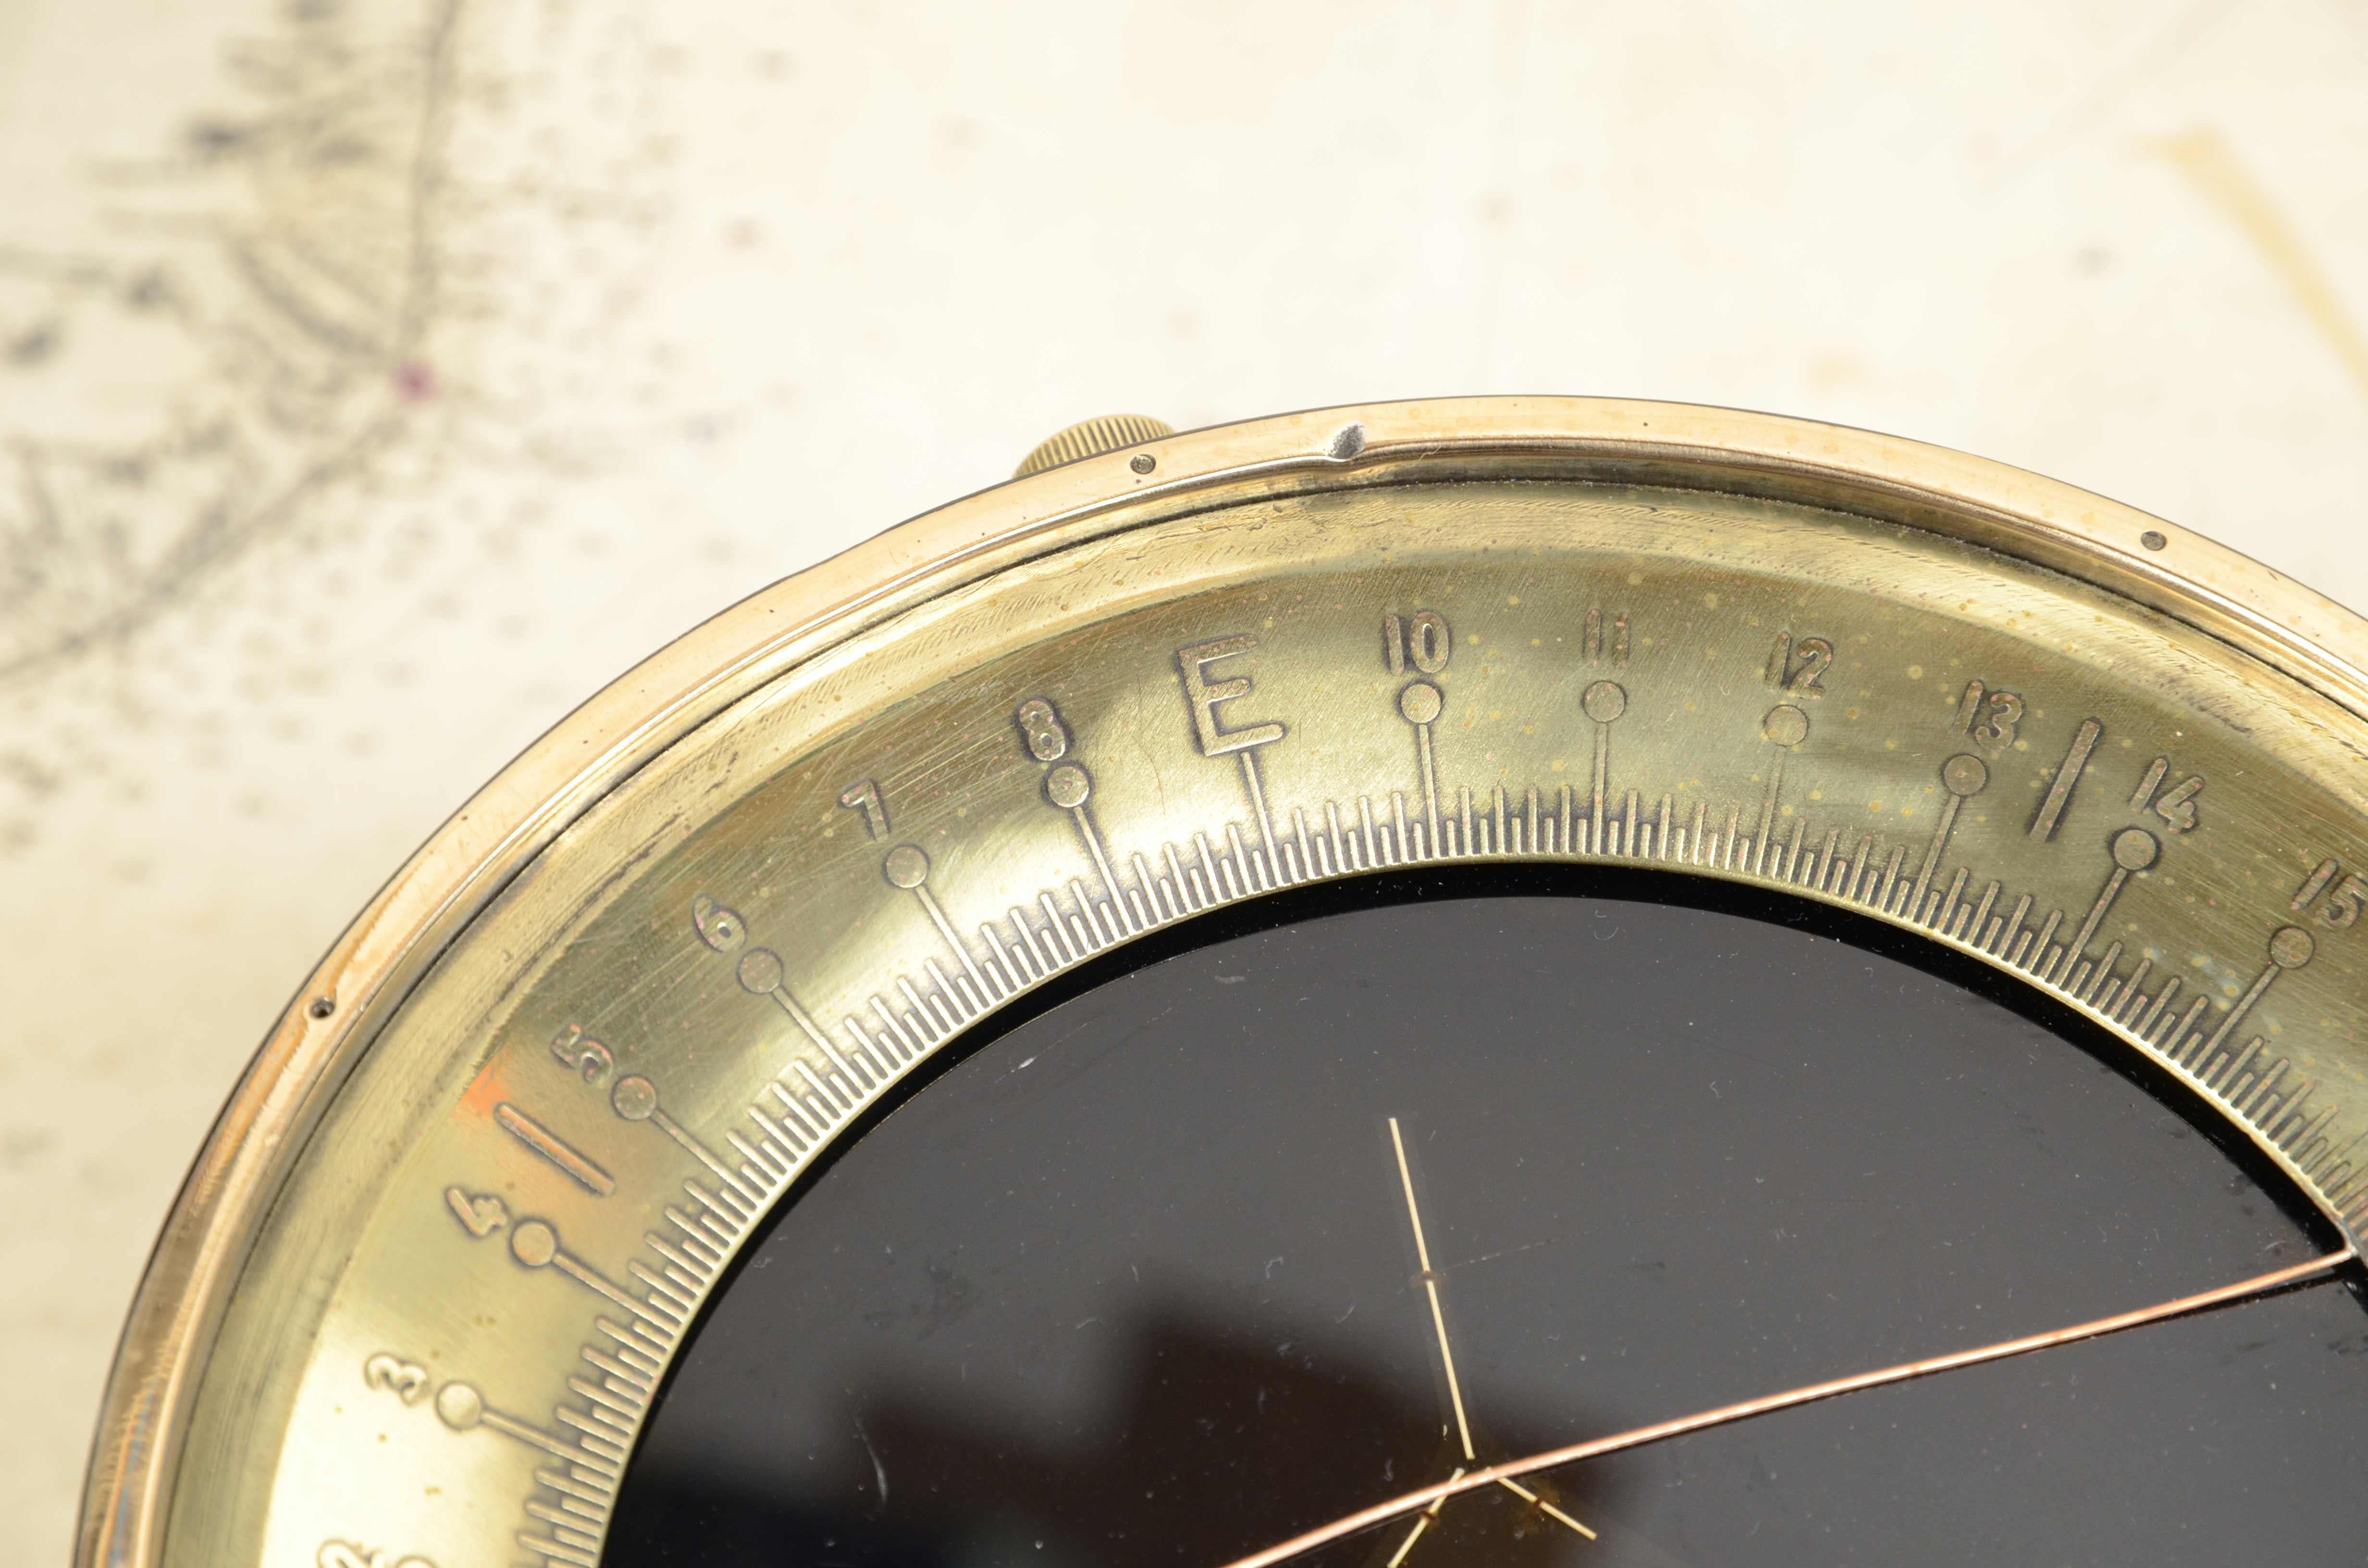 Brass and aluminum aviation compass complete with azimuth circle 1940 U.S.A In Good Condition For Sale In Milan, IT